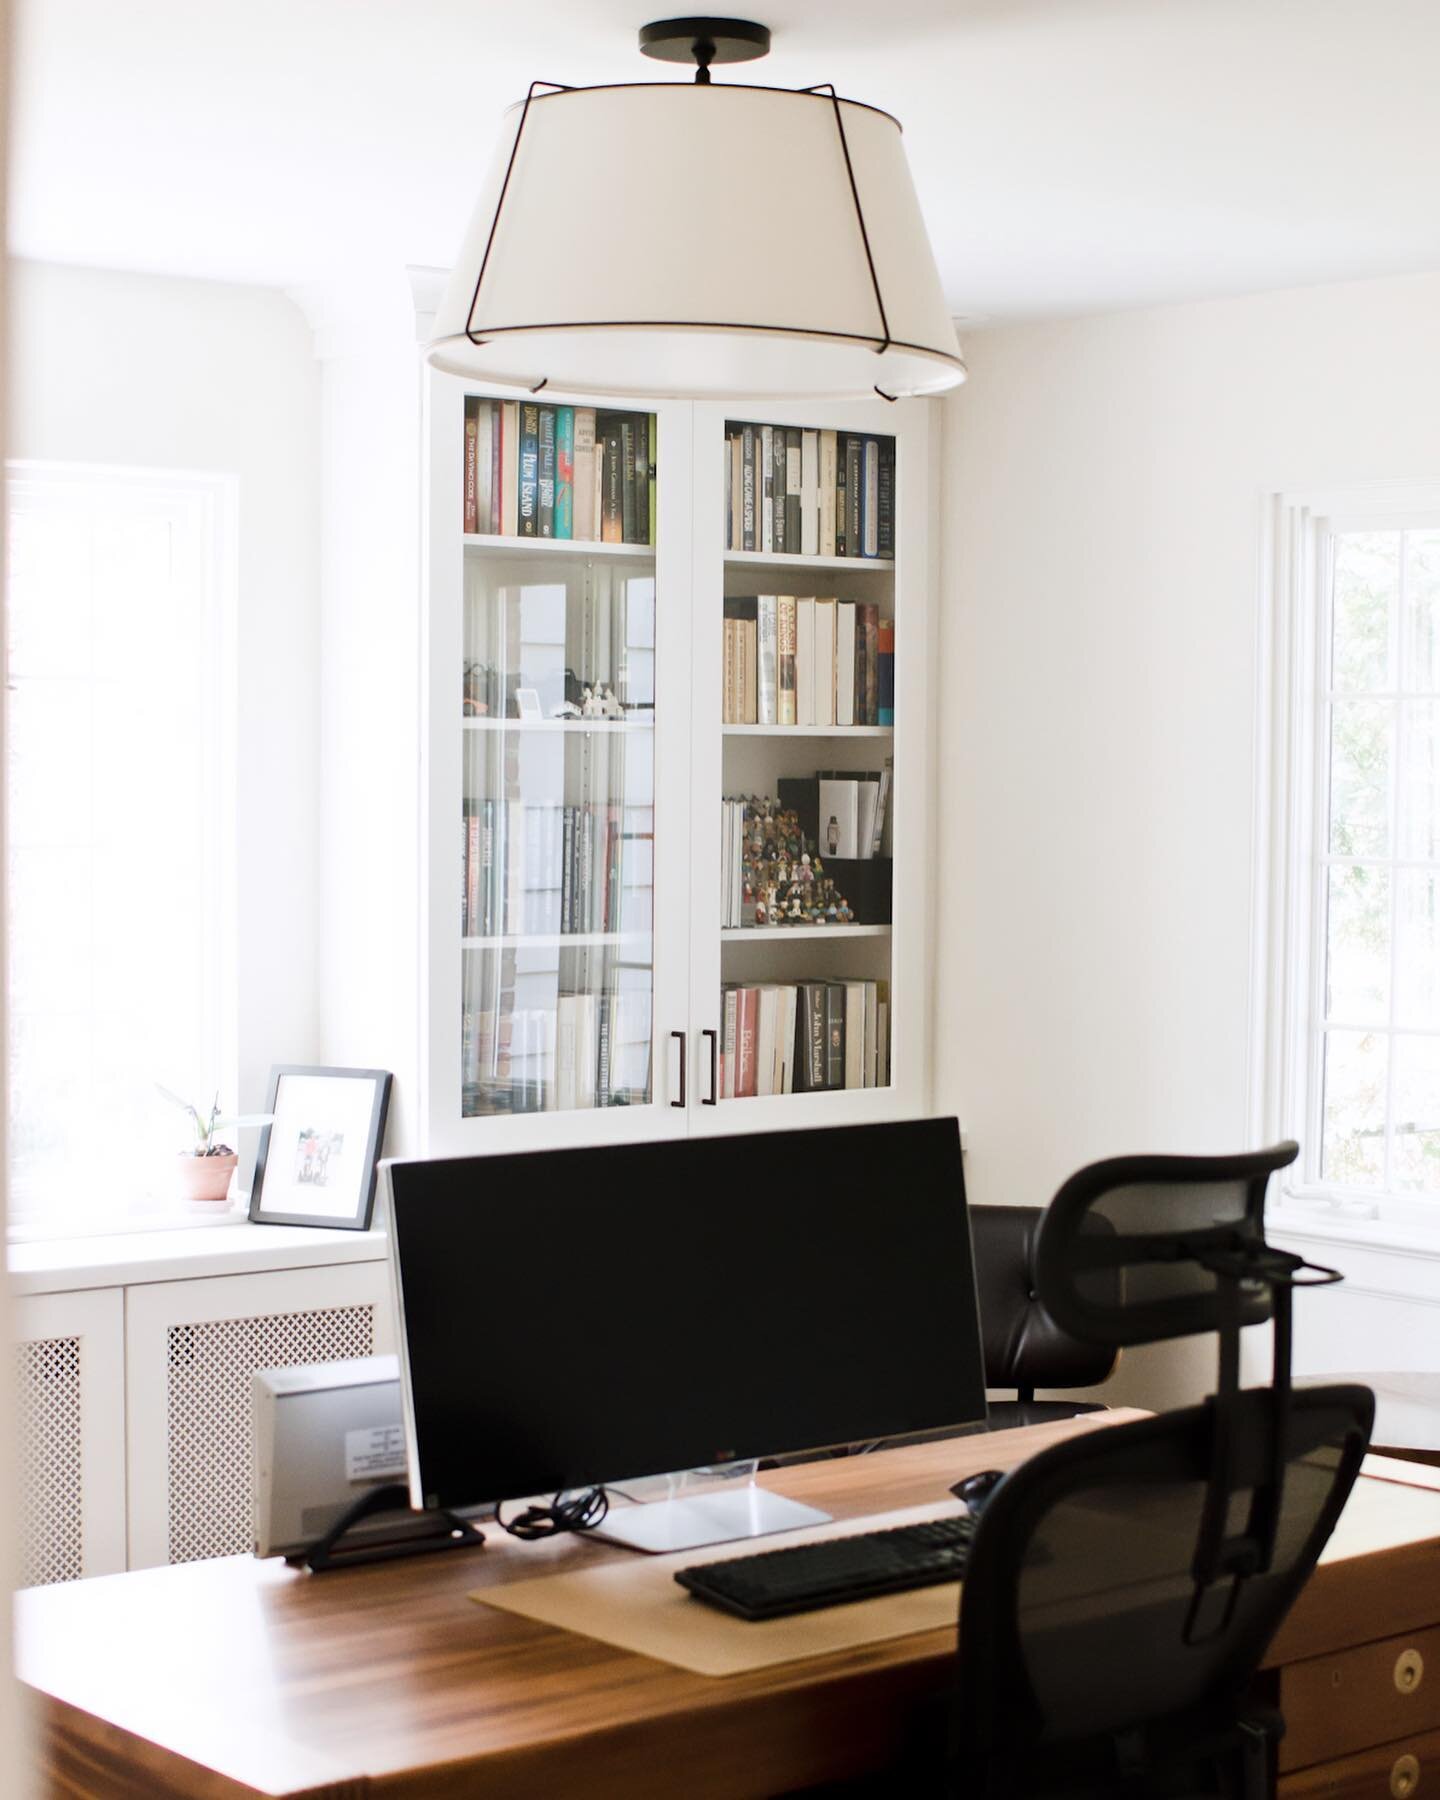 The home office for our #oldmill professional who frequently works from home. Custom bookcases for the many valuable books as well as a newly covered radiator for additional shelving. The centerpiece: a beautiful handcrafted desk, sourced by our clie